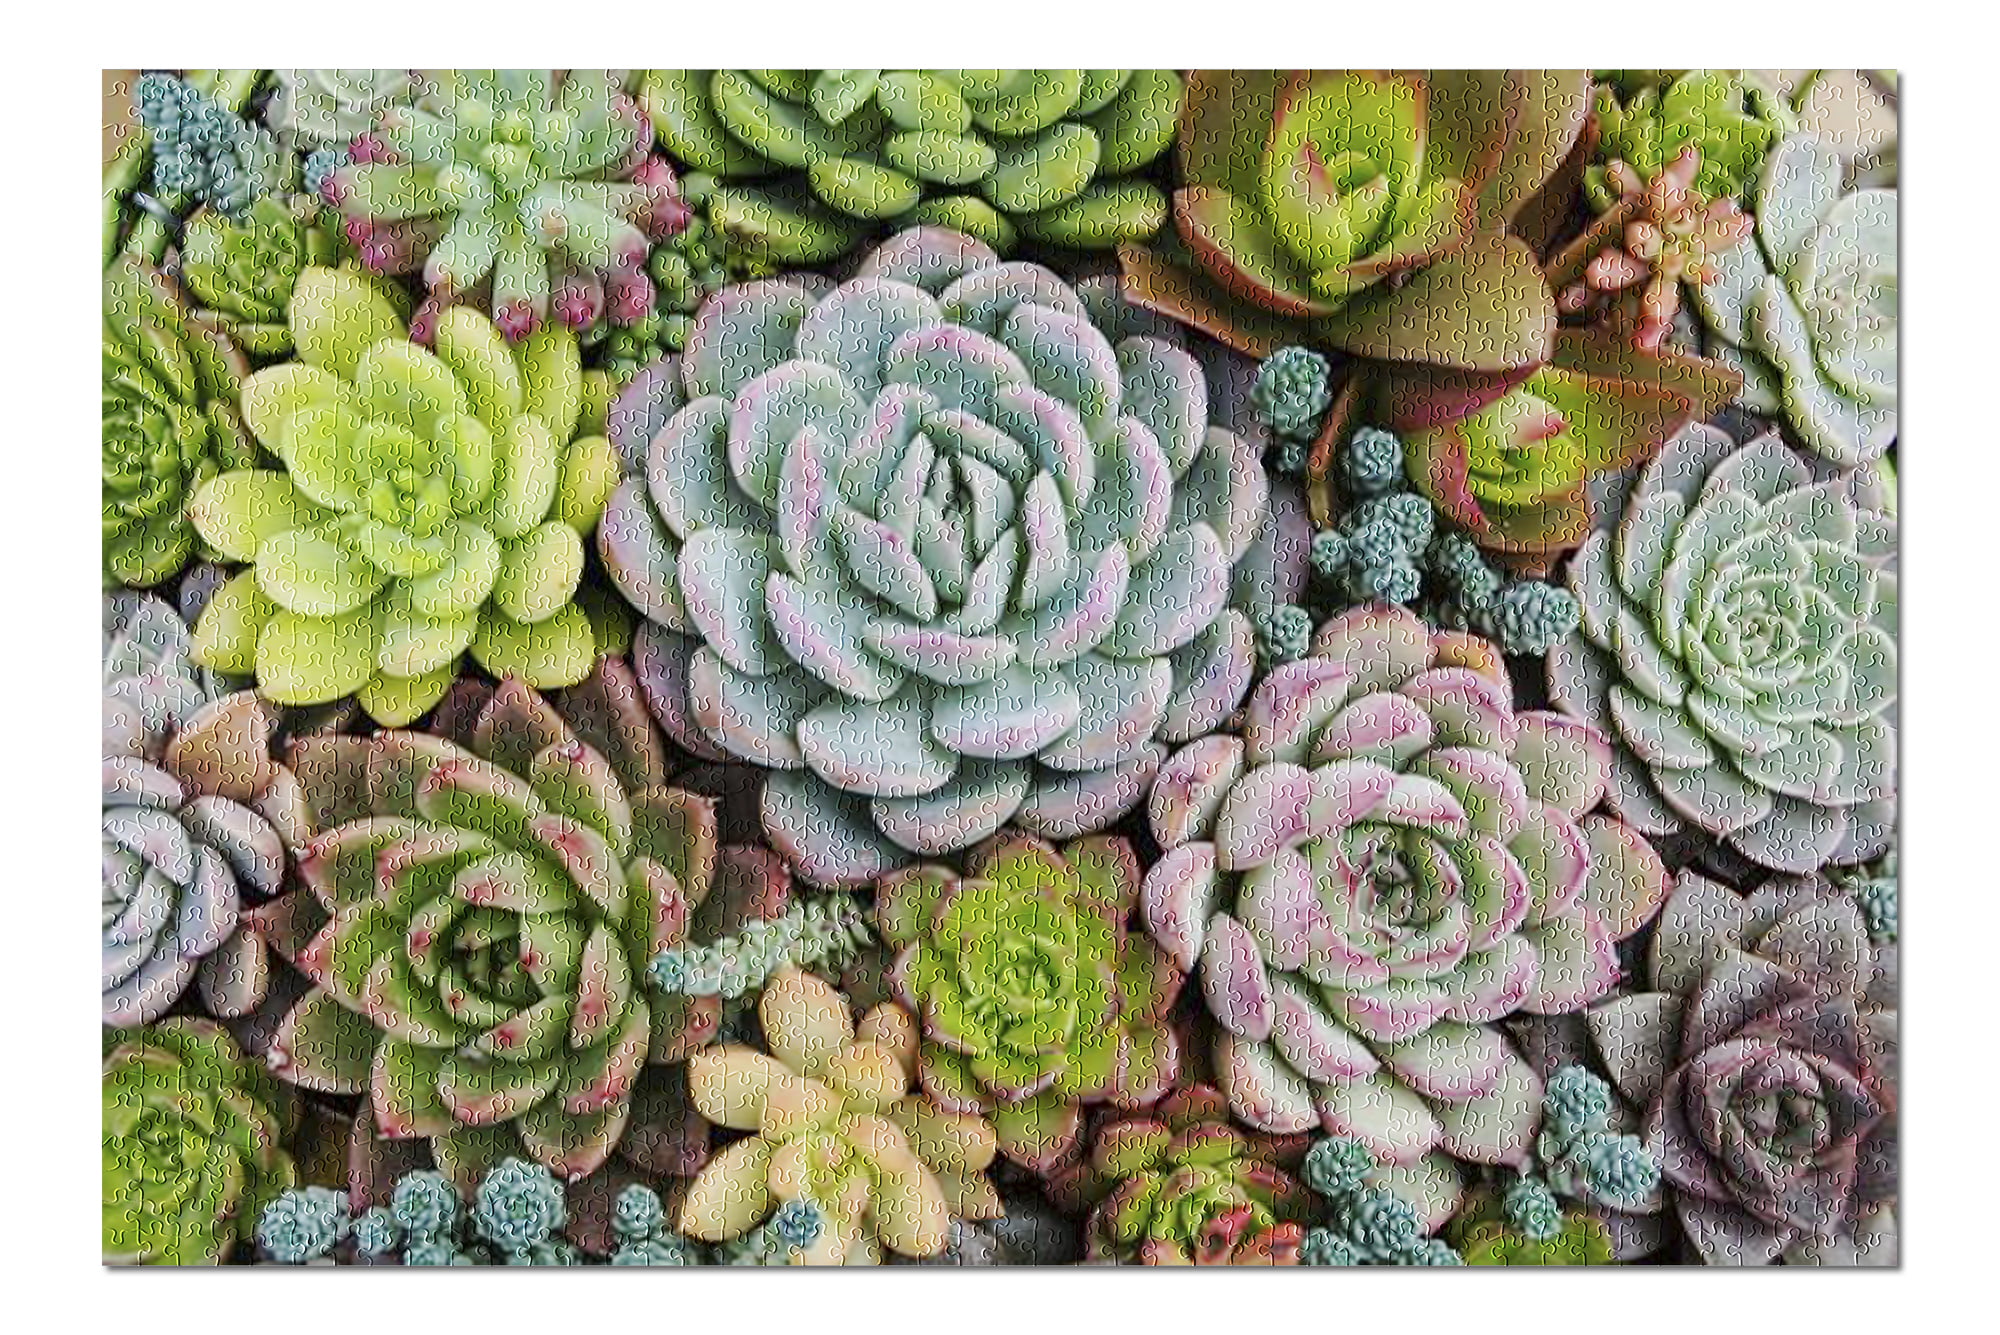 Great for Family Time Pieces Fit Together Perfectly 1000 Piece Large New Succulents Plants Puzzles for Adults Kids Upgraded Jigsaw Puzzles Educational Parent Child Games 20 x 30inch